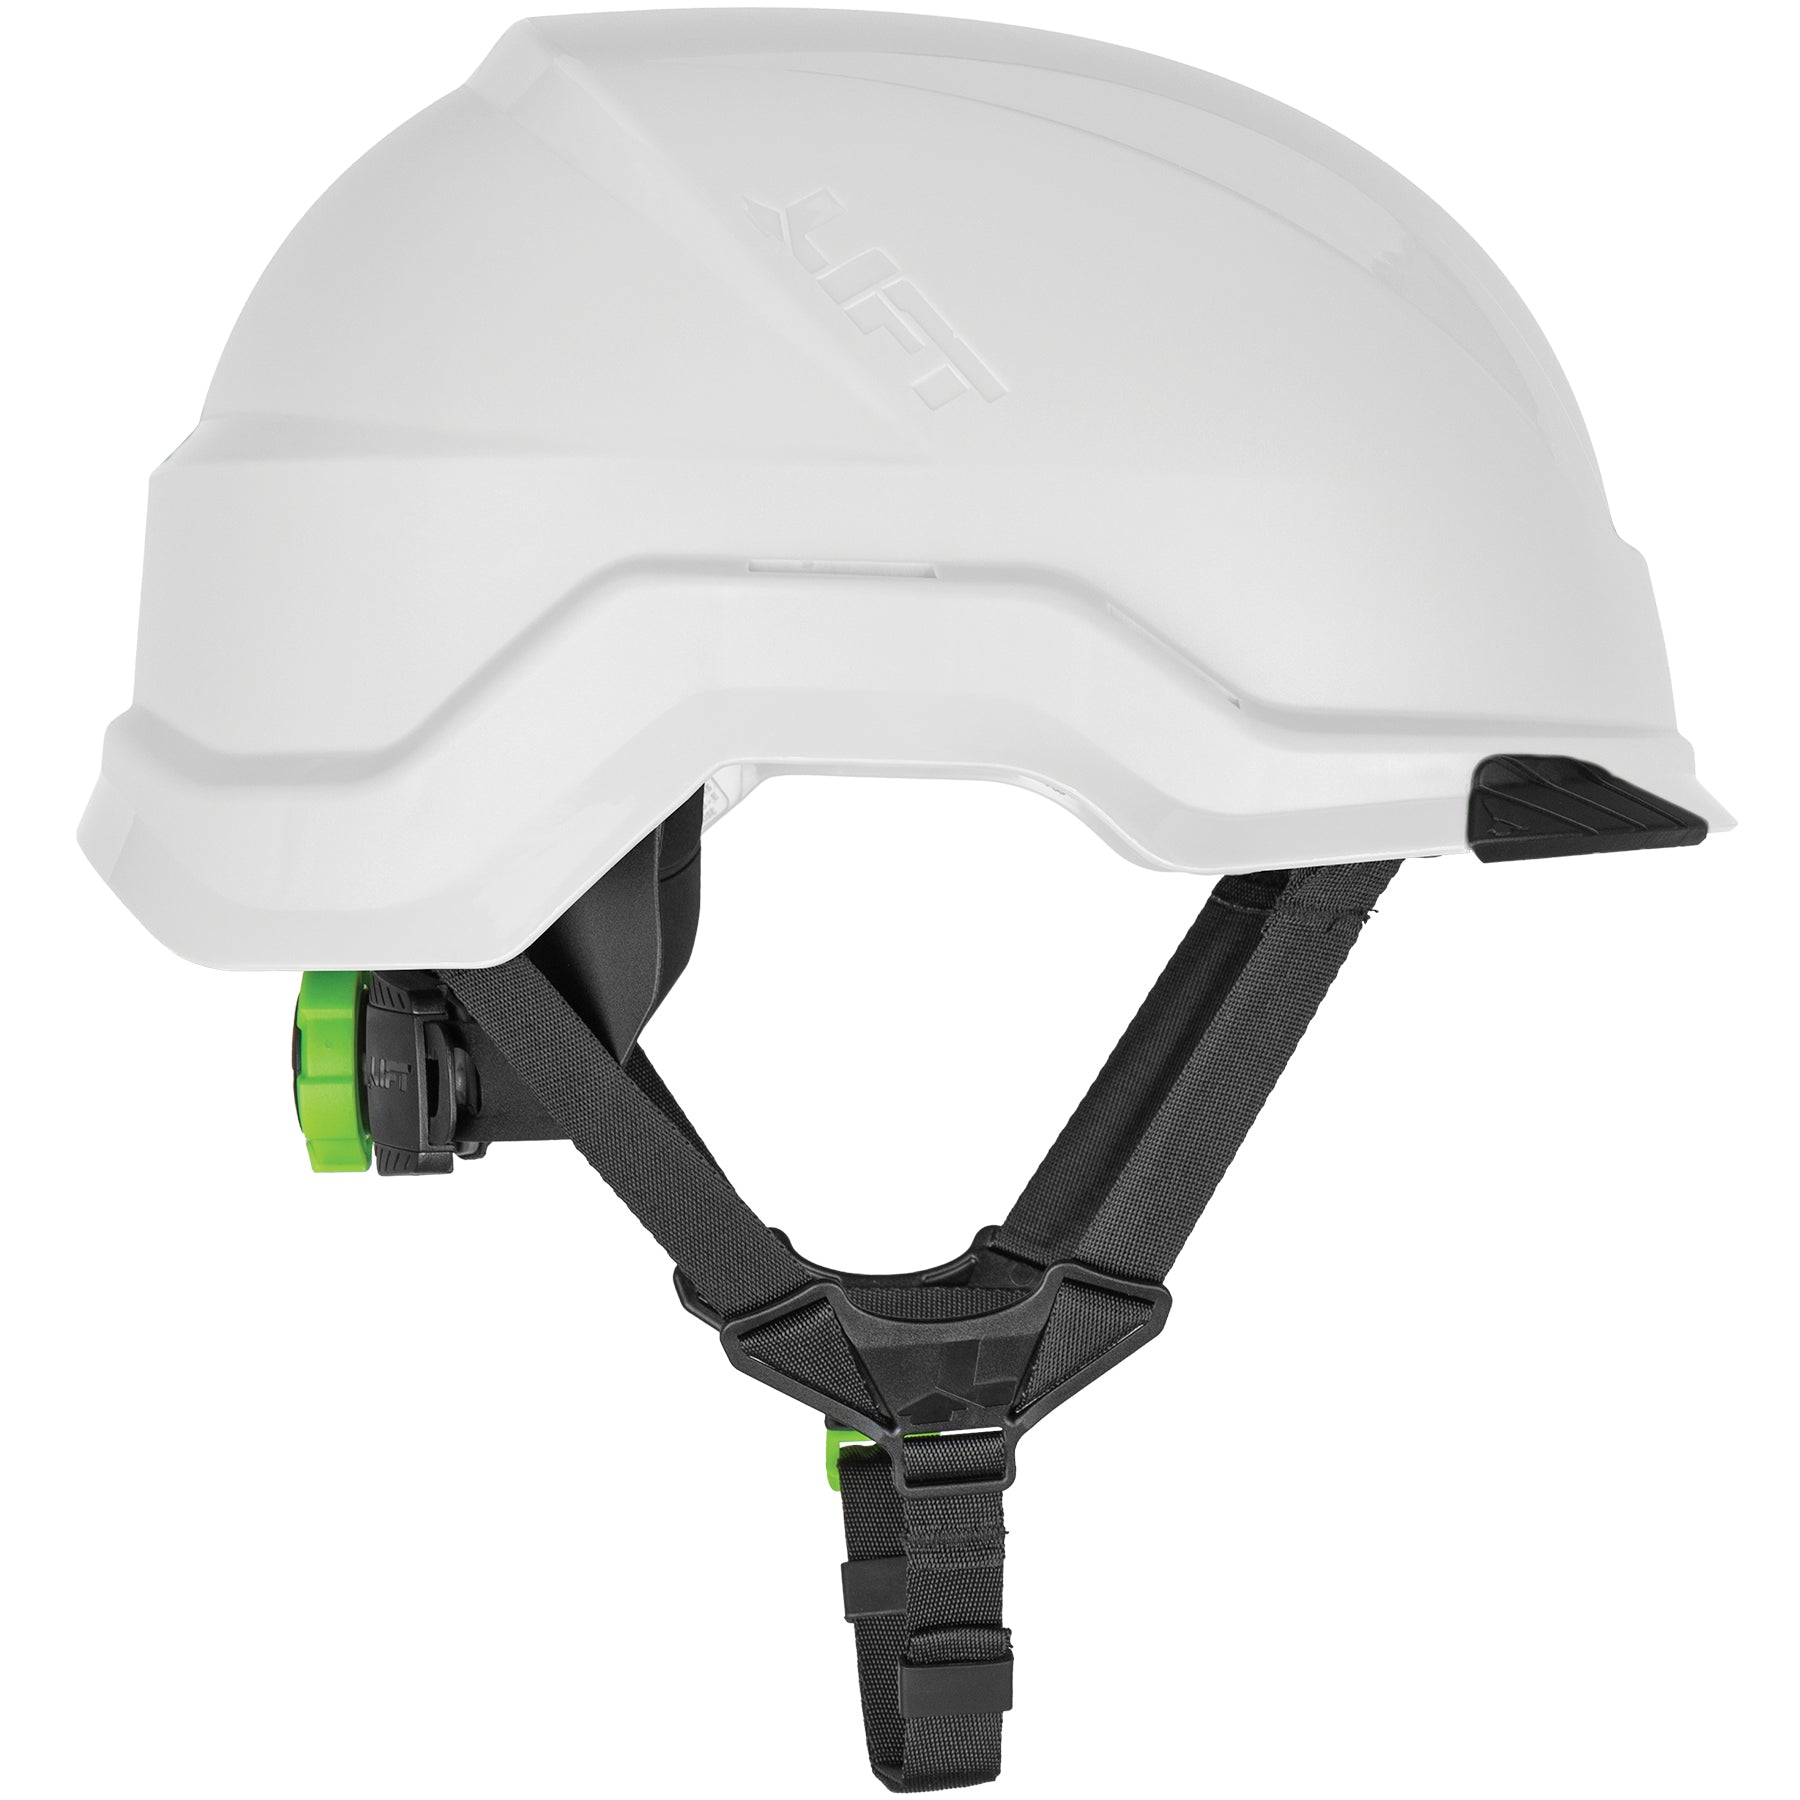 Wholesale Air Conditioned Hard Hat That Provides Protection at